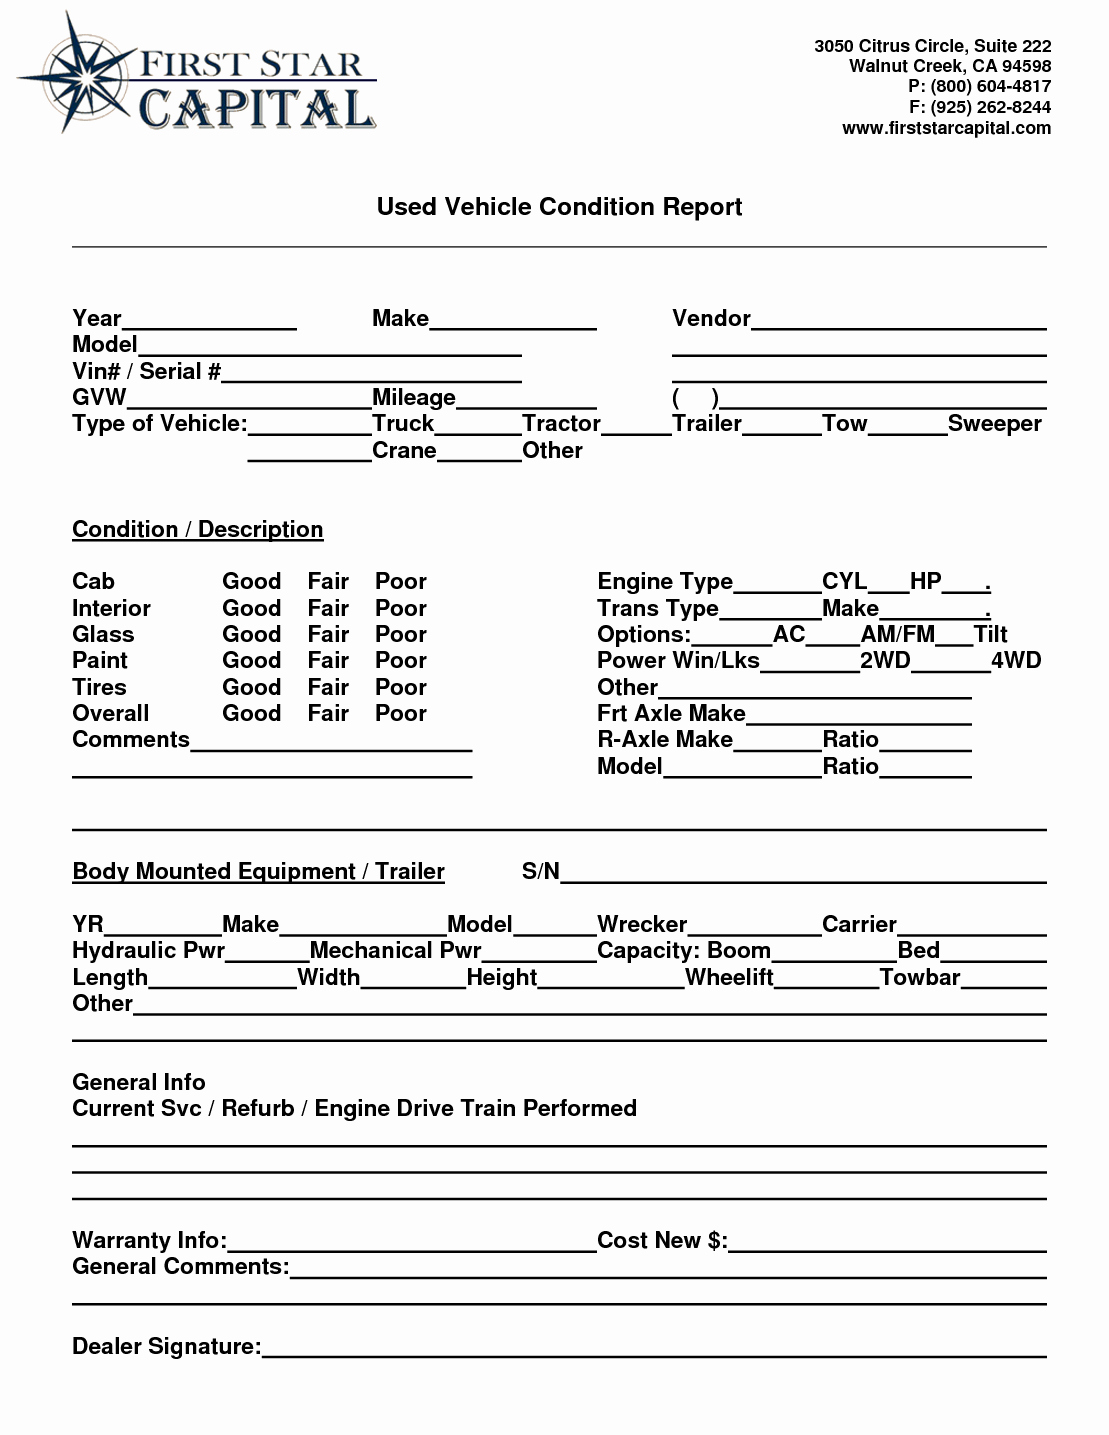 Vehicle Condition Report Templates